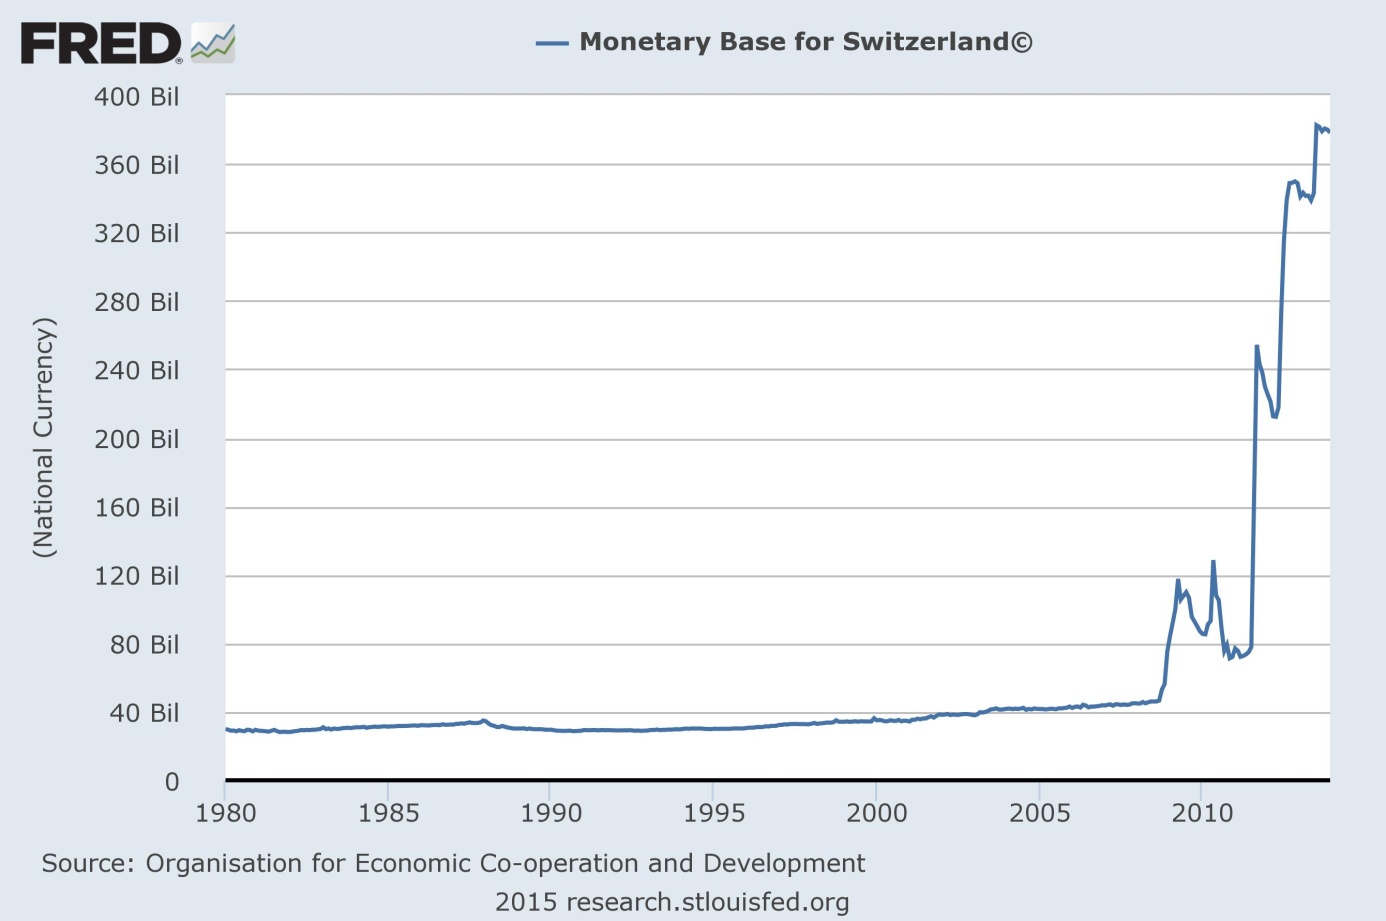 Swiss monetary base from 1980 to 2013